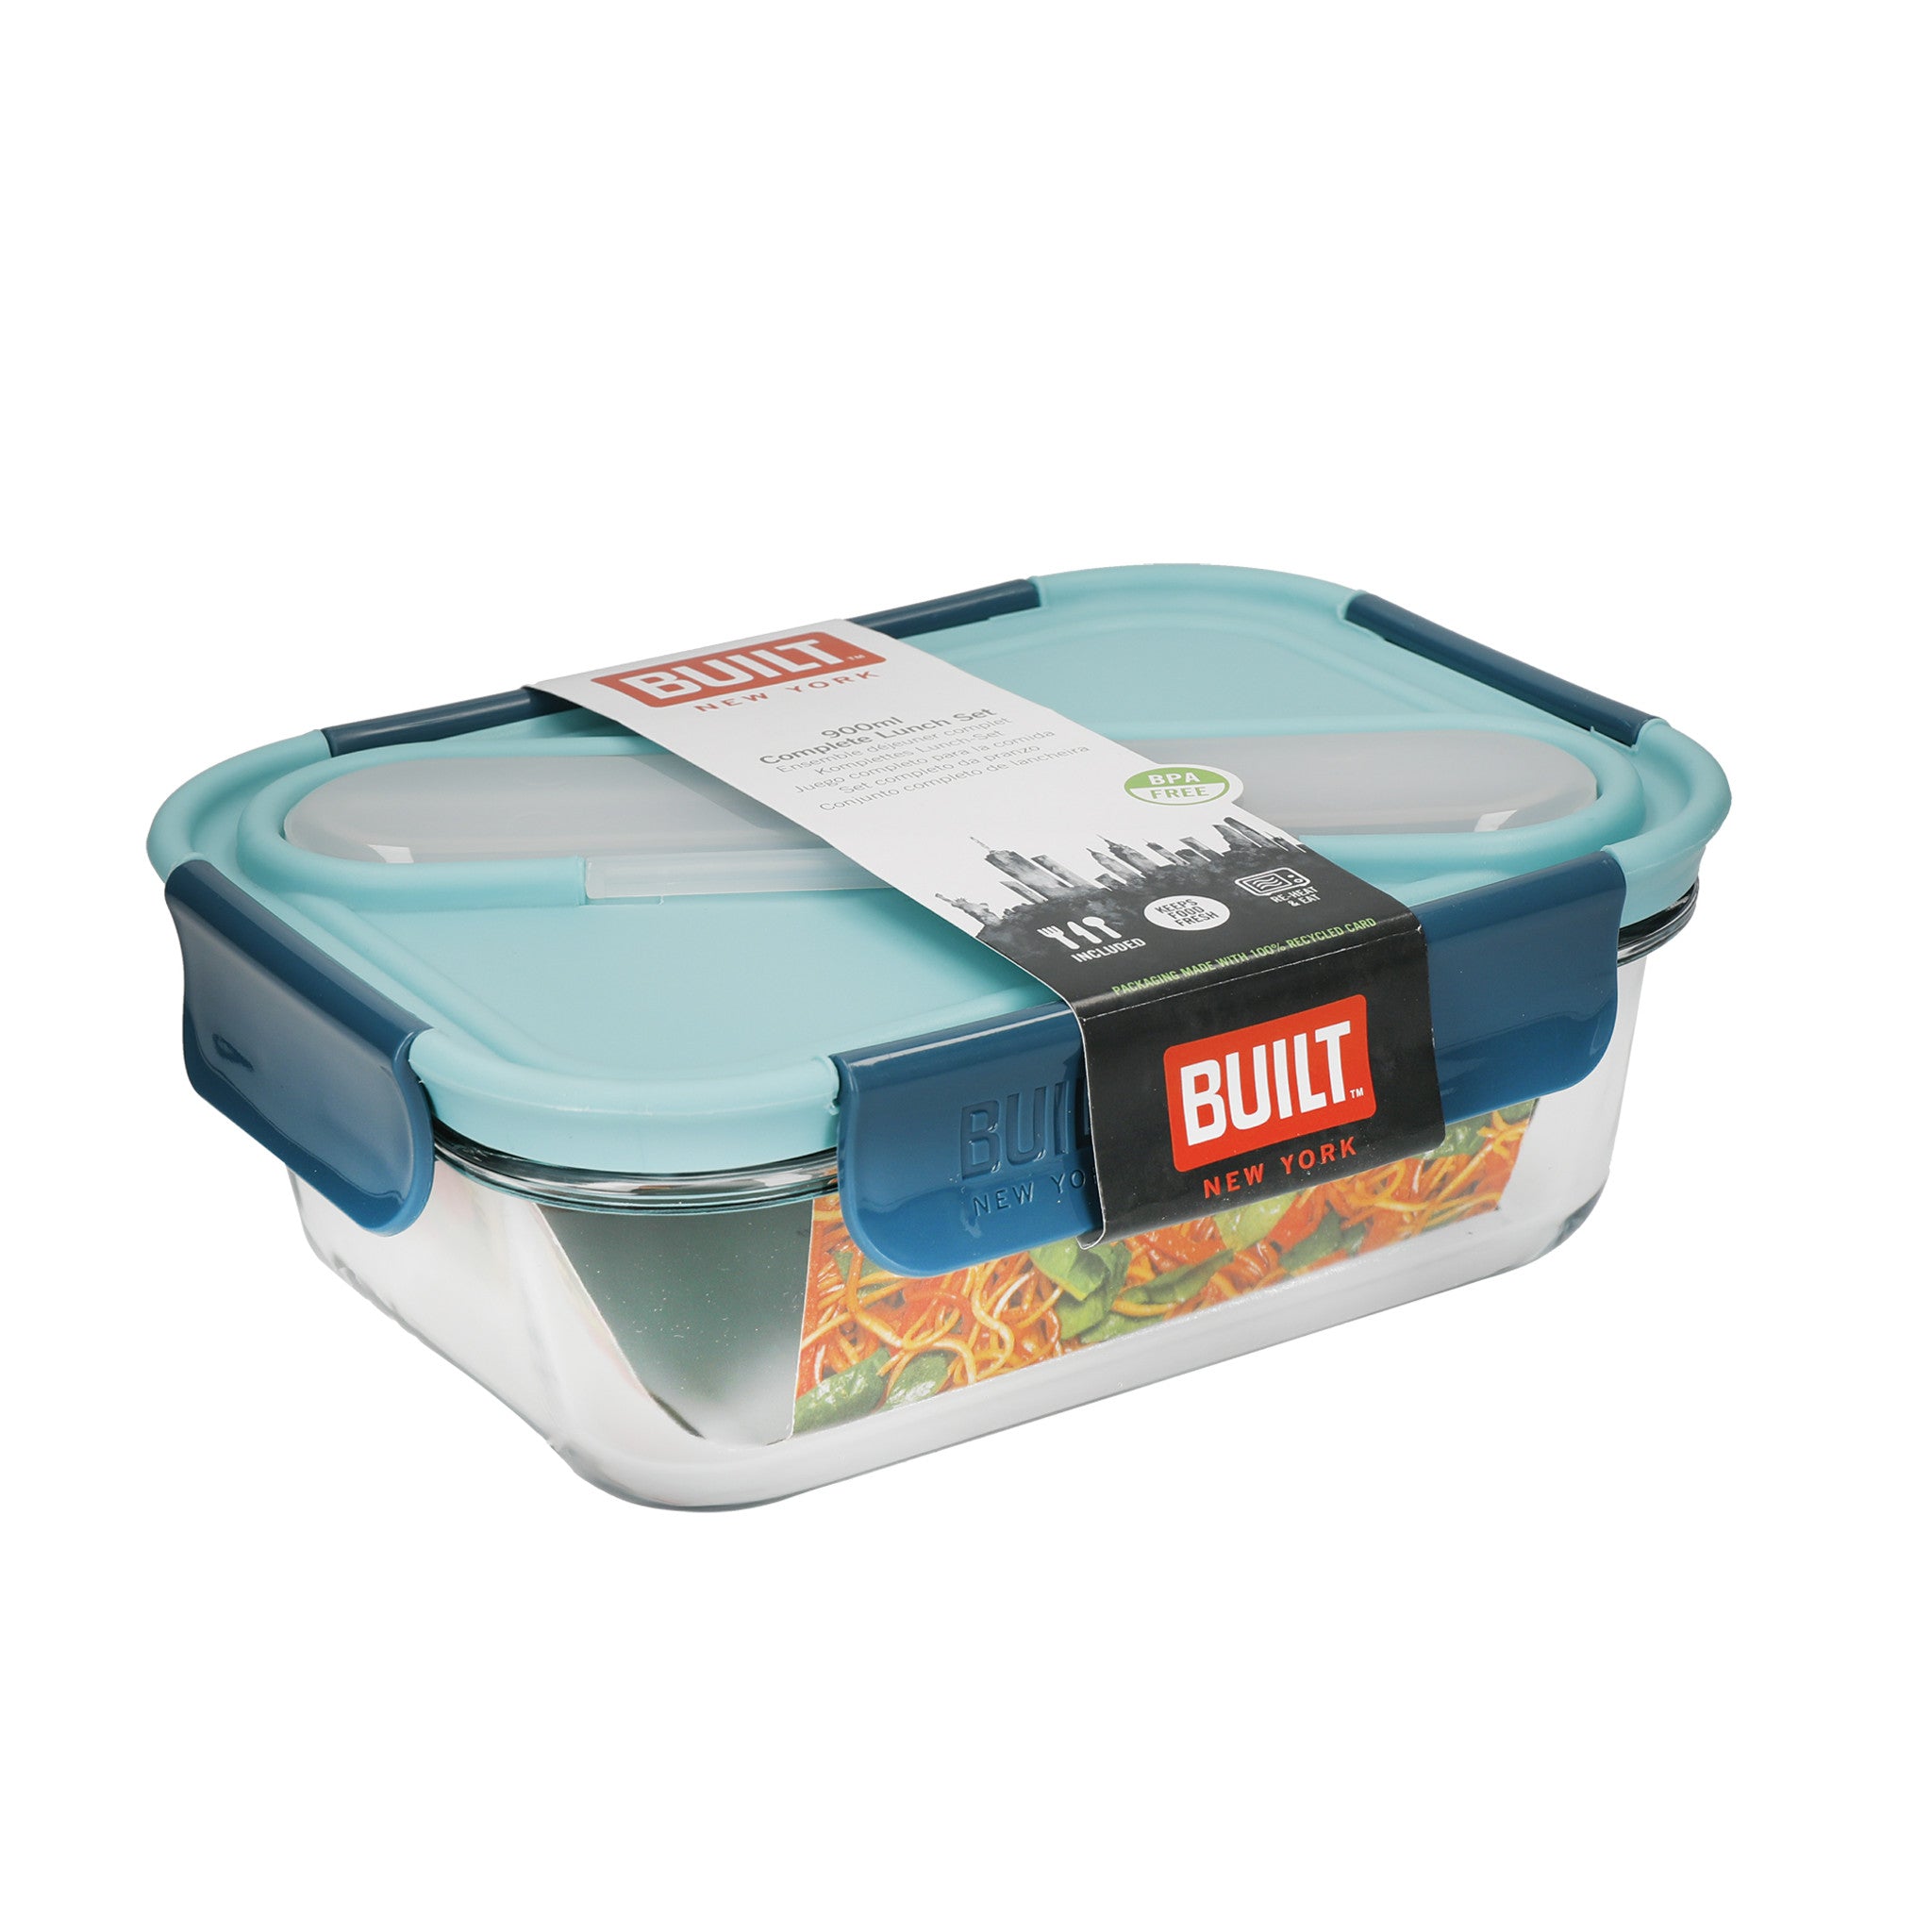 Built Professional 1 Litre Lunch Box with Cutlery Black